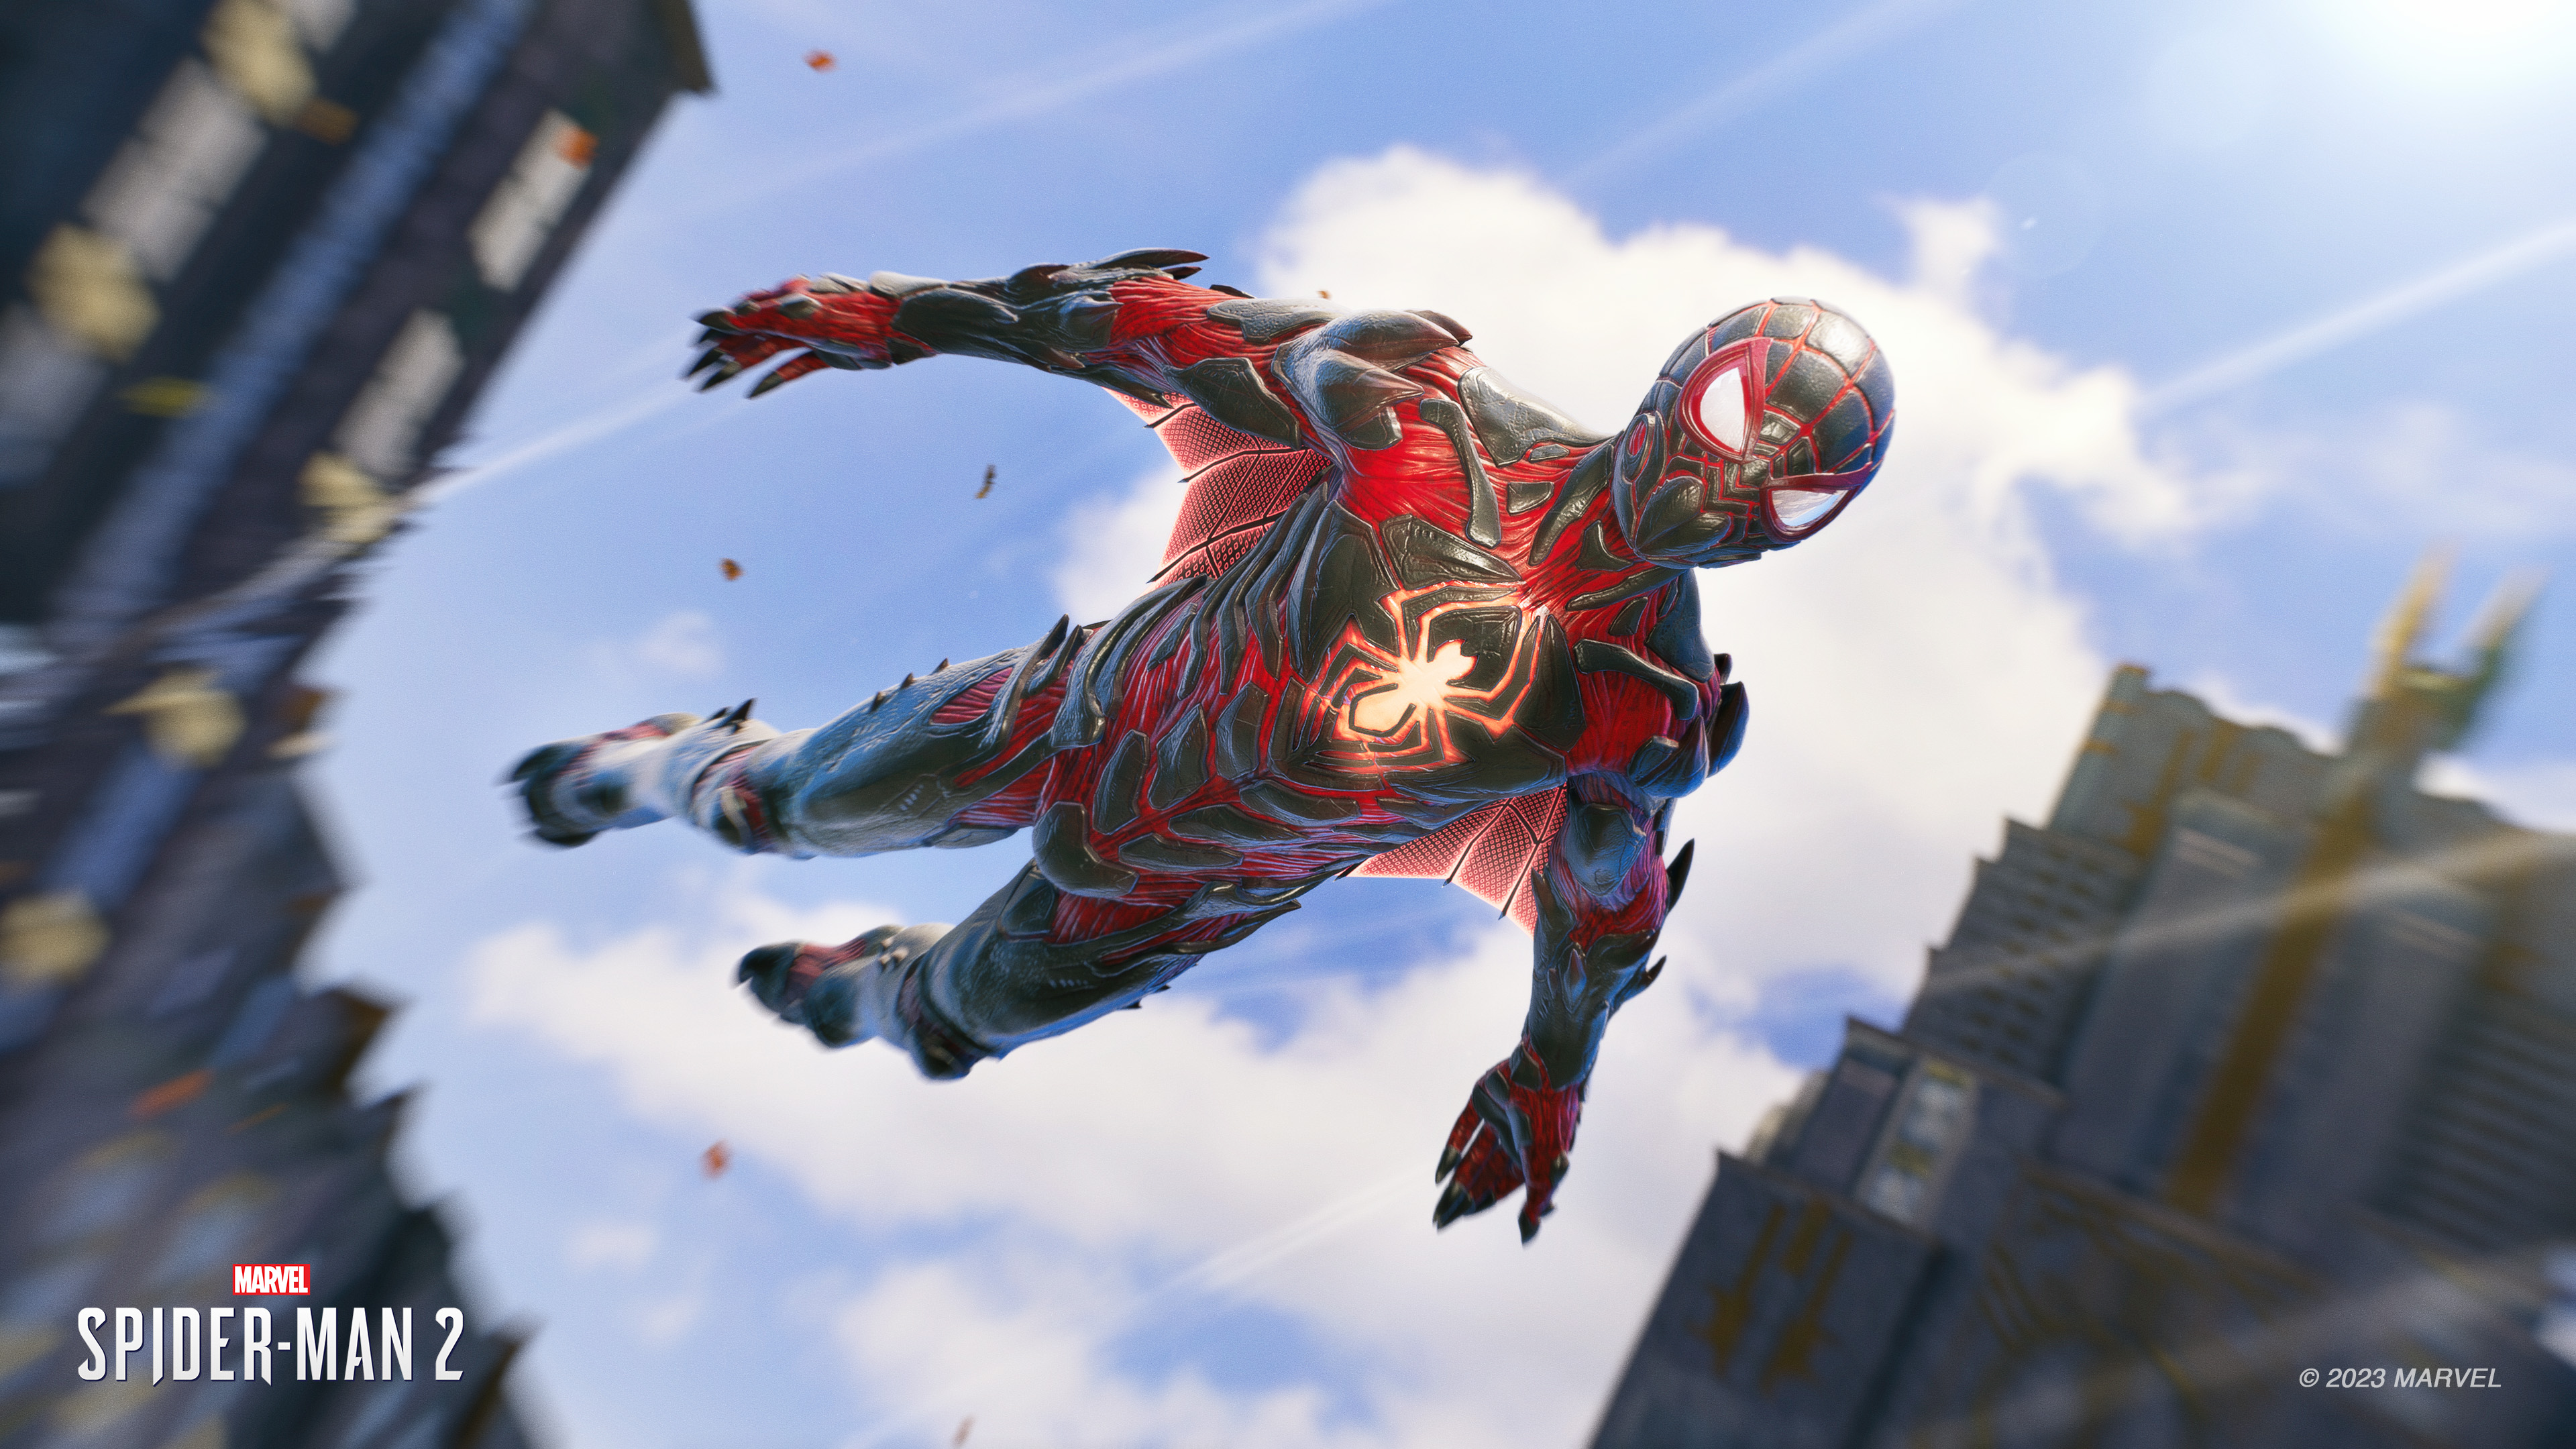 Spider-Man 2 suits list - How to unlock all suits